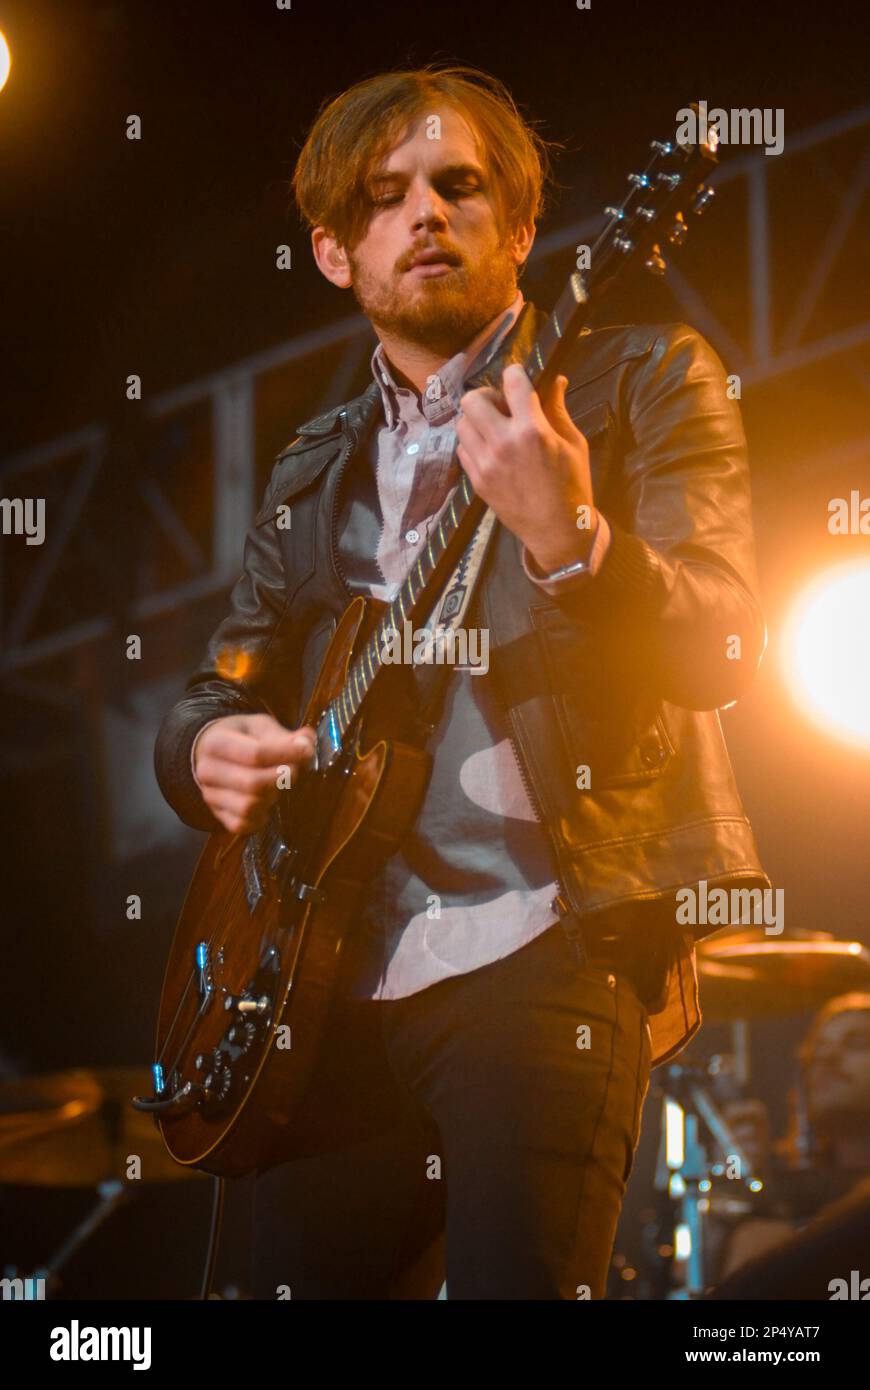 Caleb Followill - Kings of Leon, V2008, Hylands Park, Chelmsford, Essex, Britain - 17 August 2008 Stock Photo